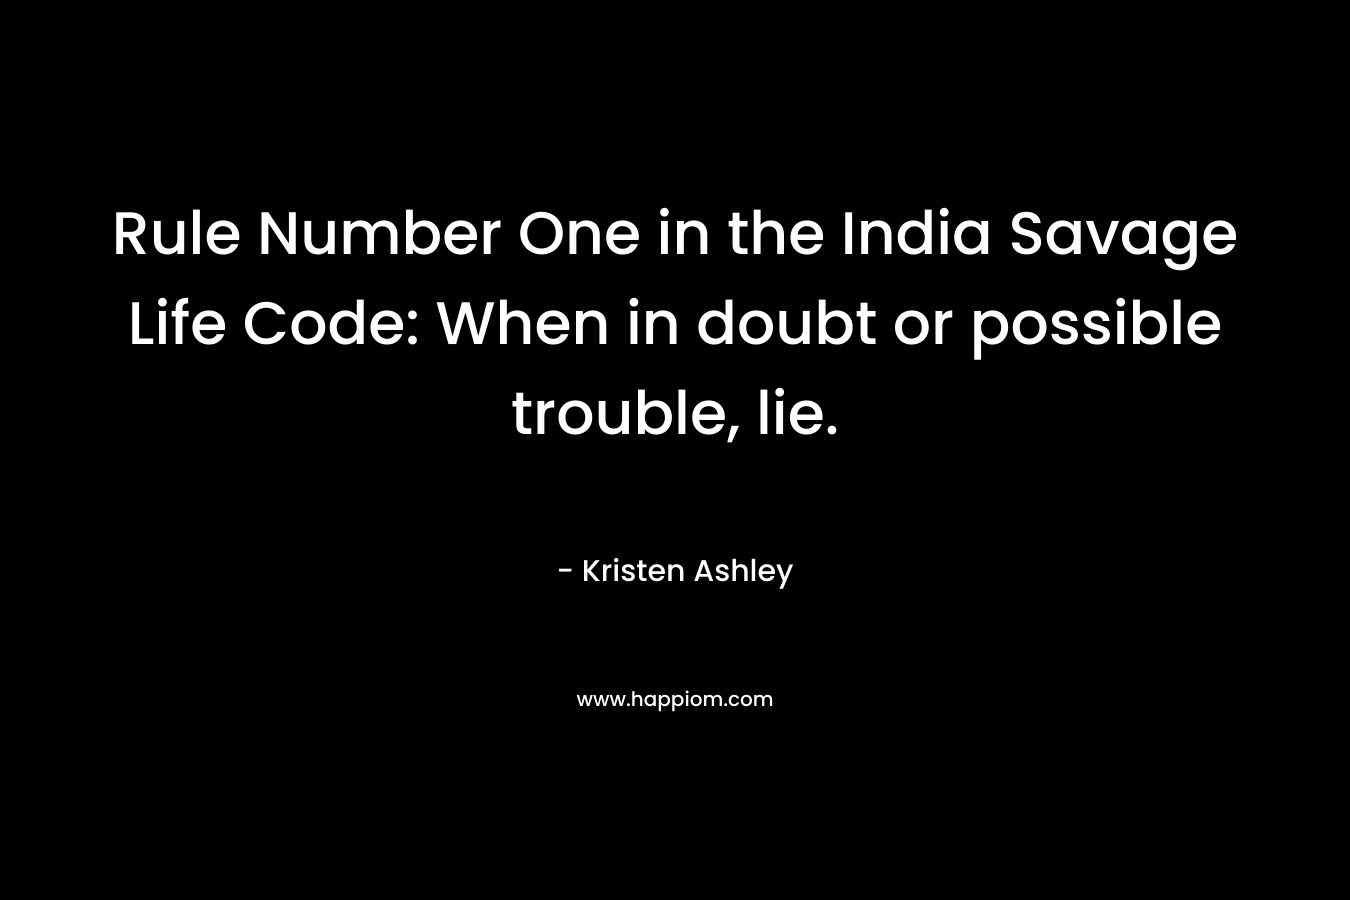 Rule Number One in the India Savage Life Code: When in doubt or possible trouble, lie.